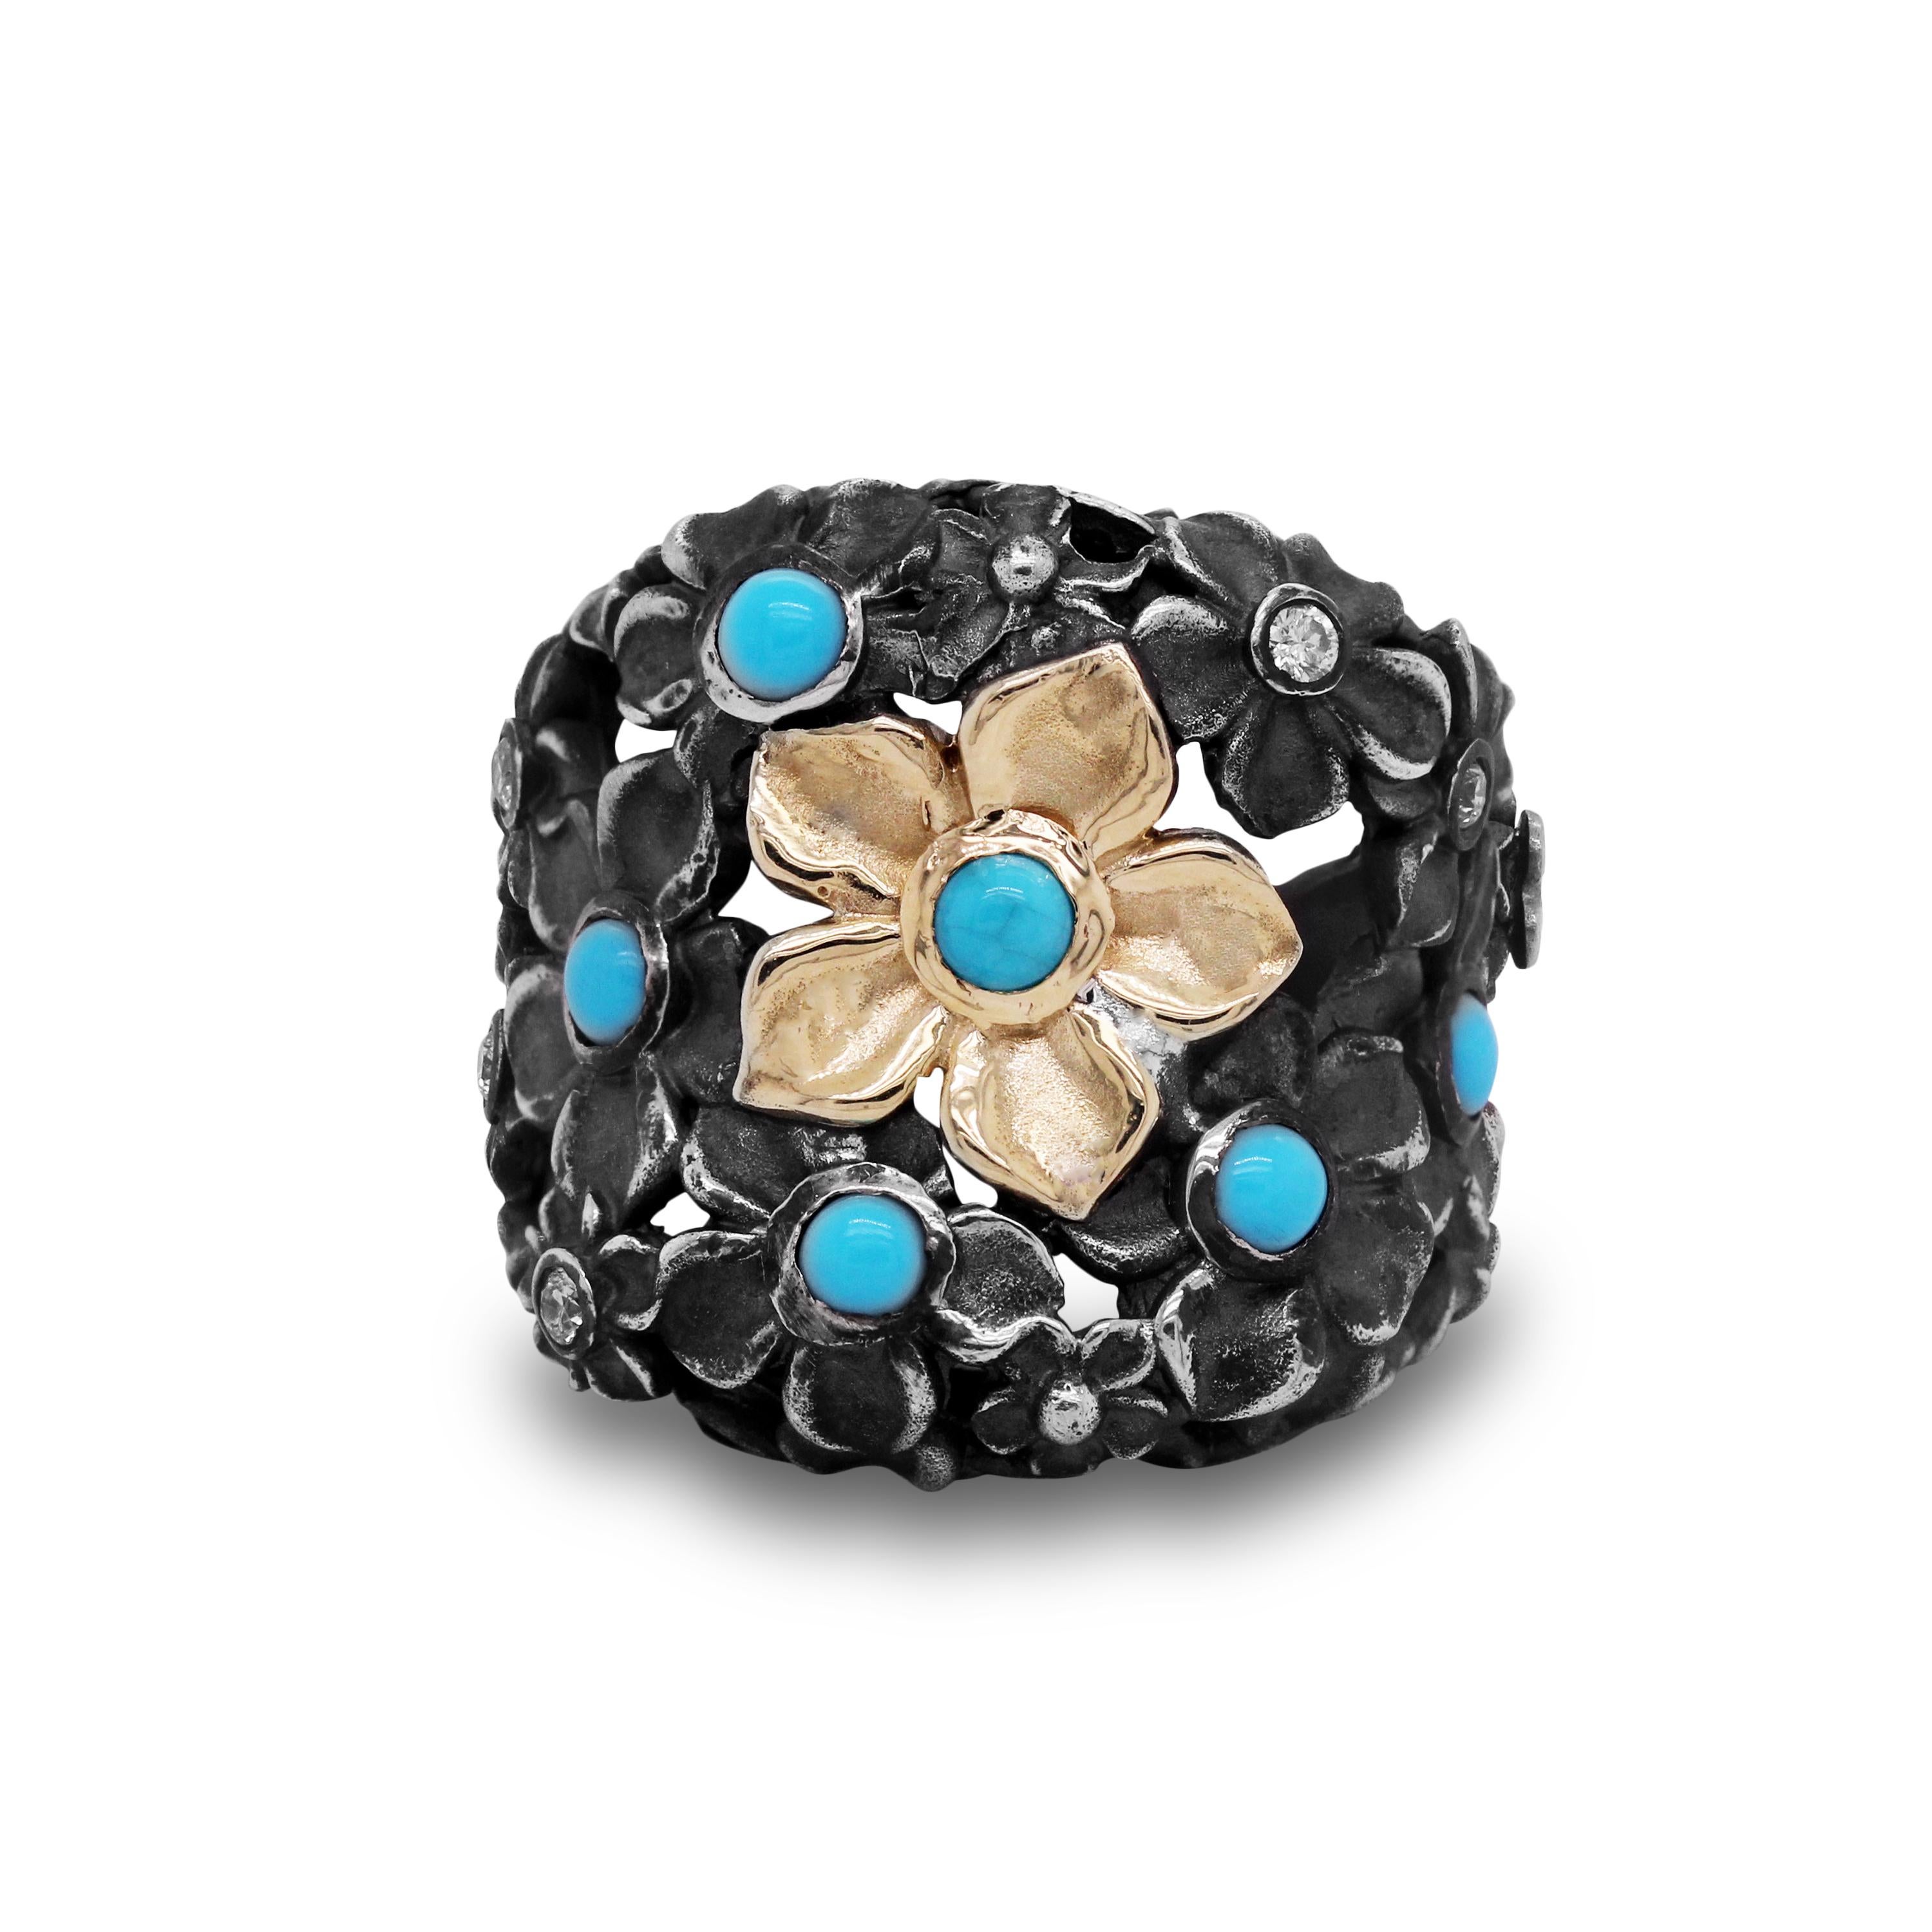 Aged Silver and 18K Gold Floral Ring with Sleeping Beauty Turquoise and Diamonds

This ring is from the Stambolian 